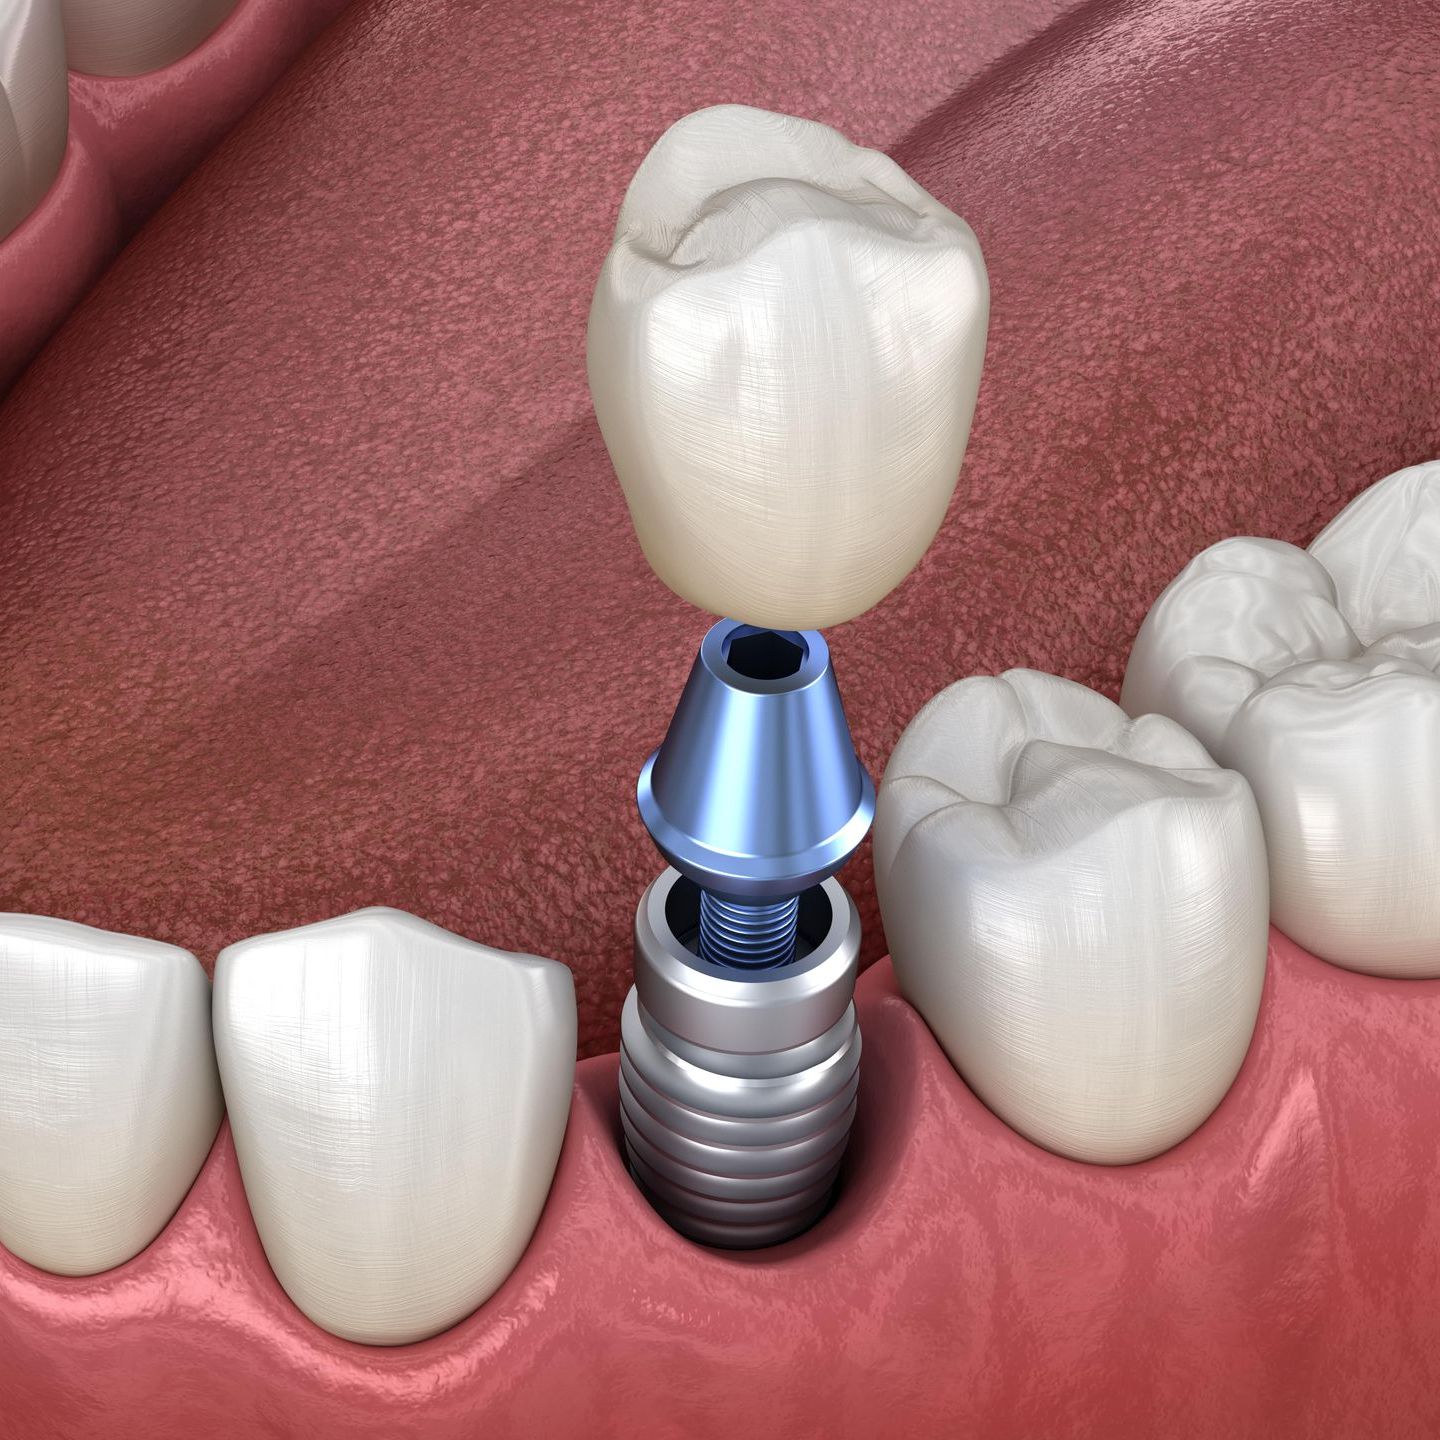 A computer generated image of a single tooth implant showing the implant, abutment, and crown